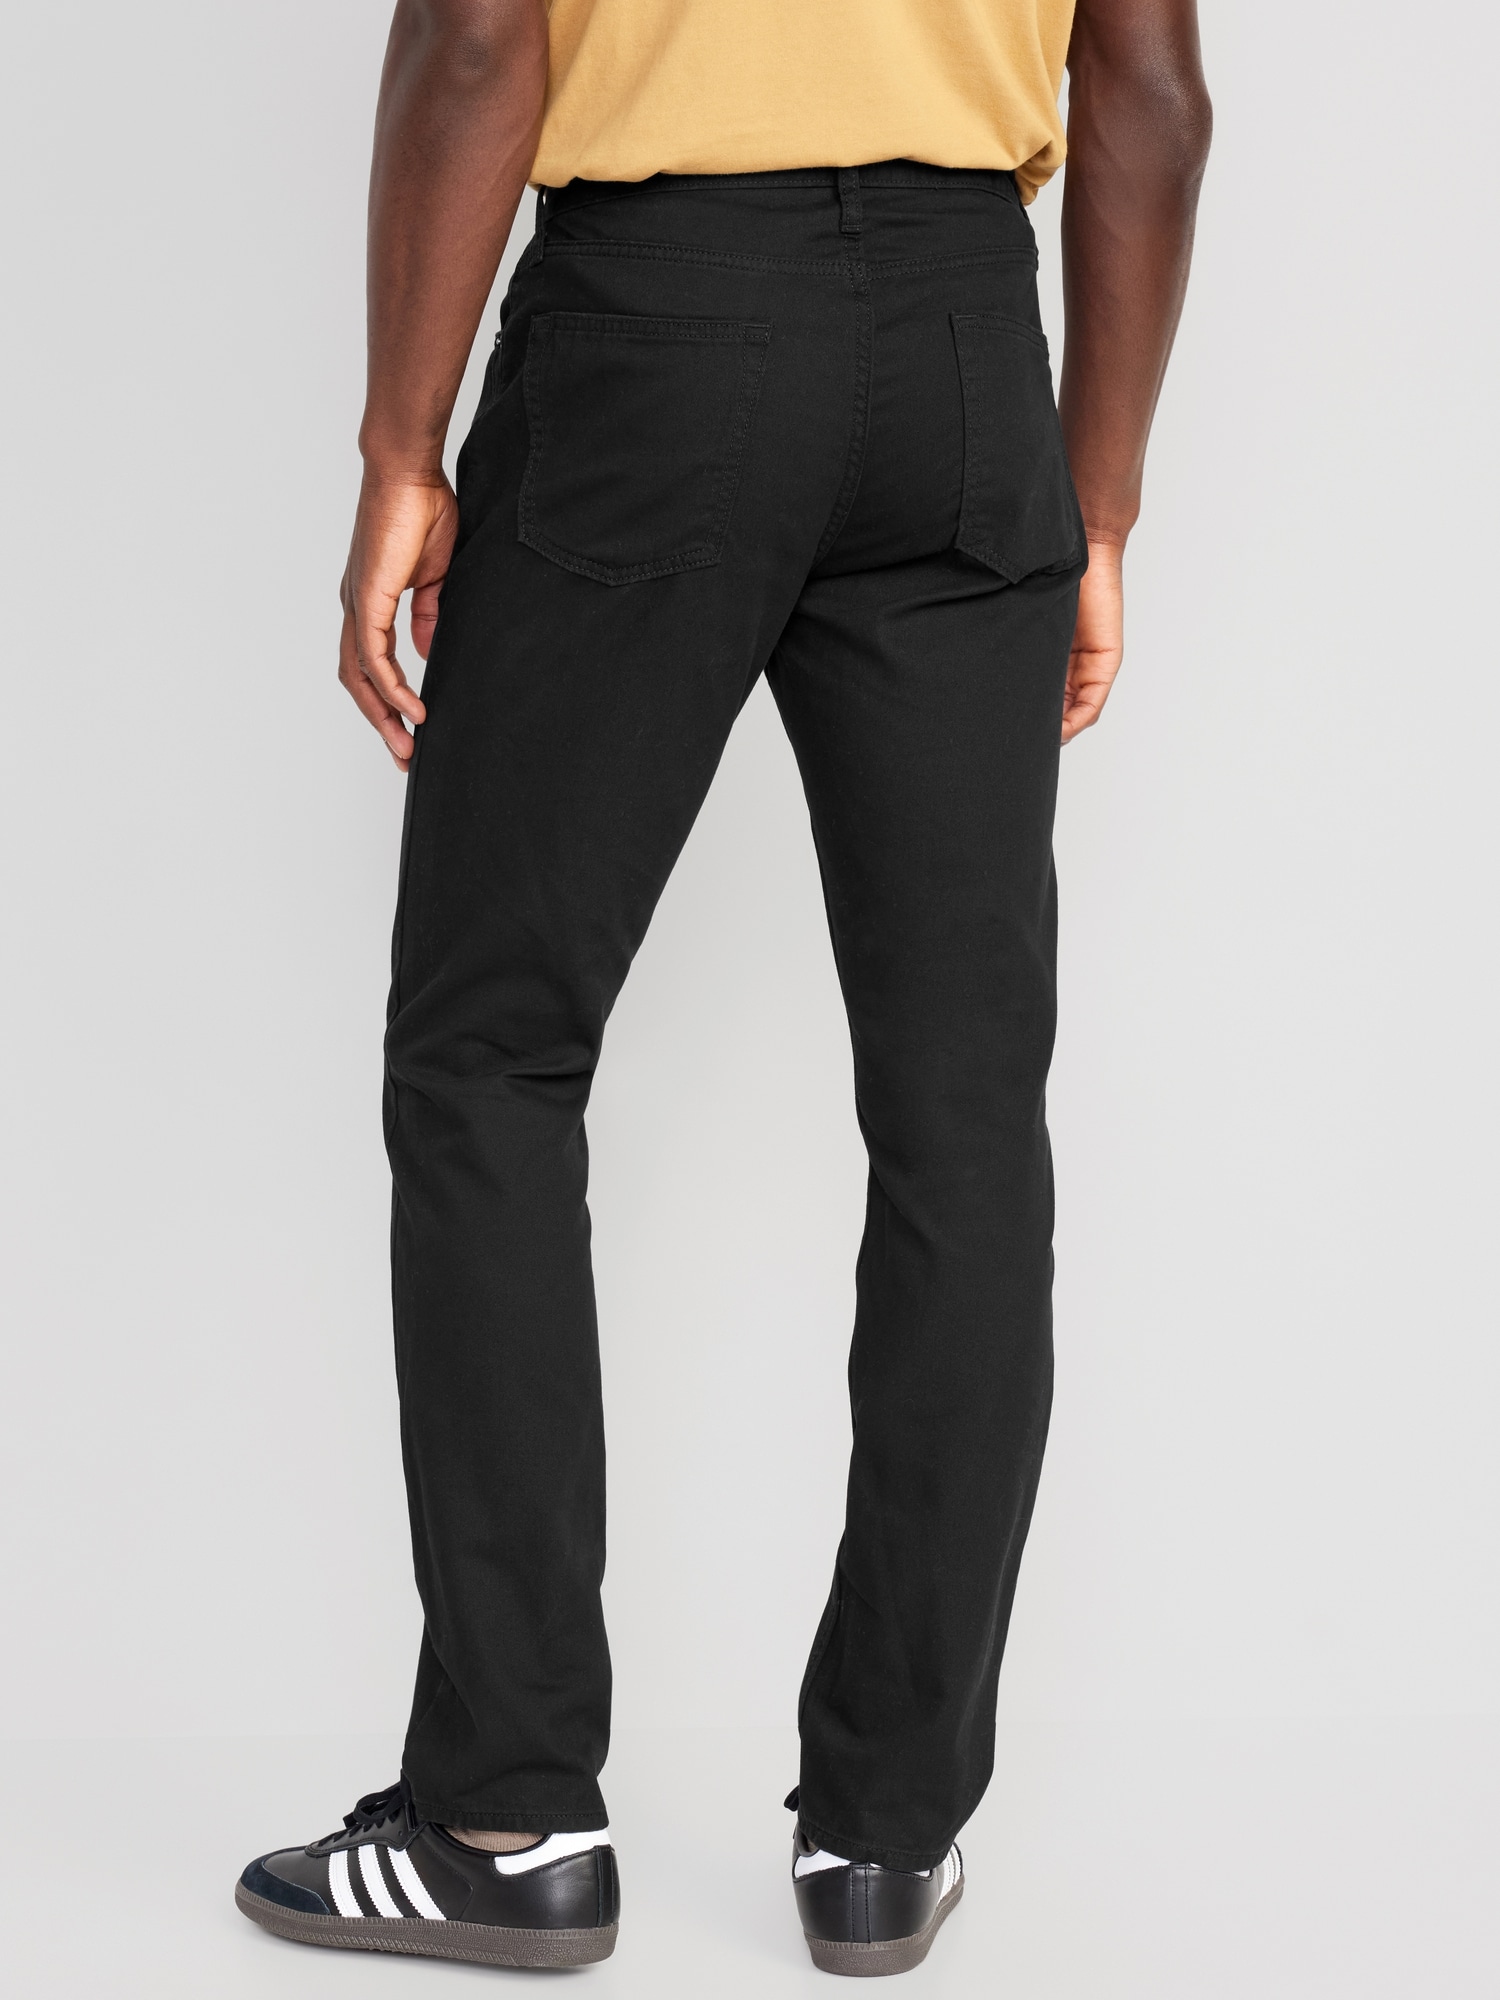 Wow Slim Non-Stretch Five-Pocket Pants | Old Navy